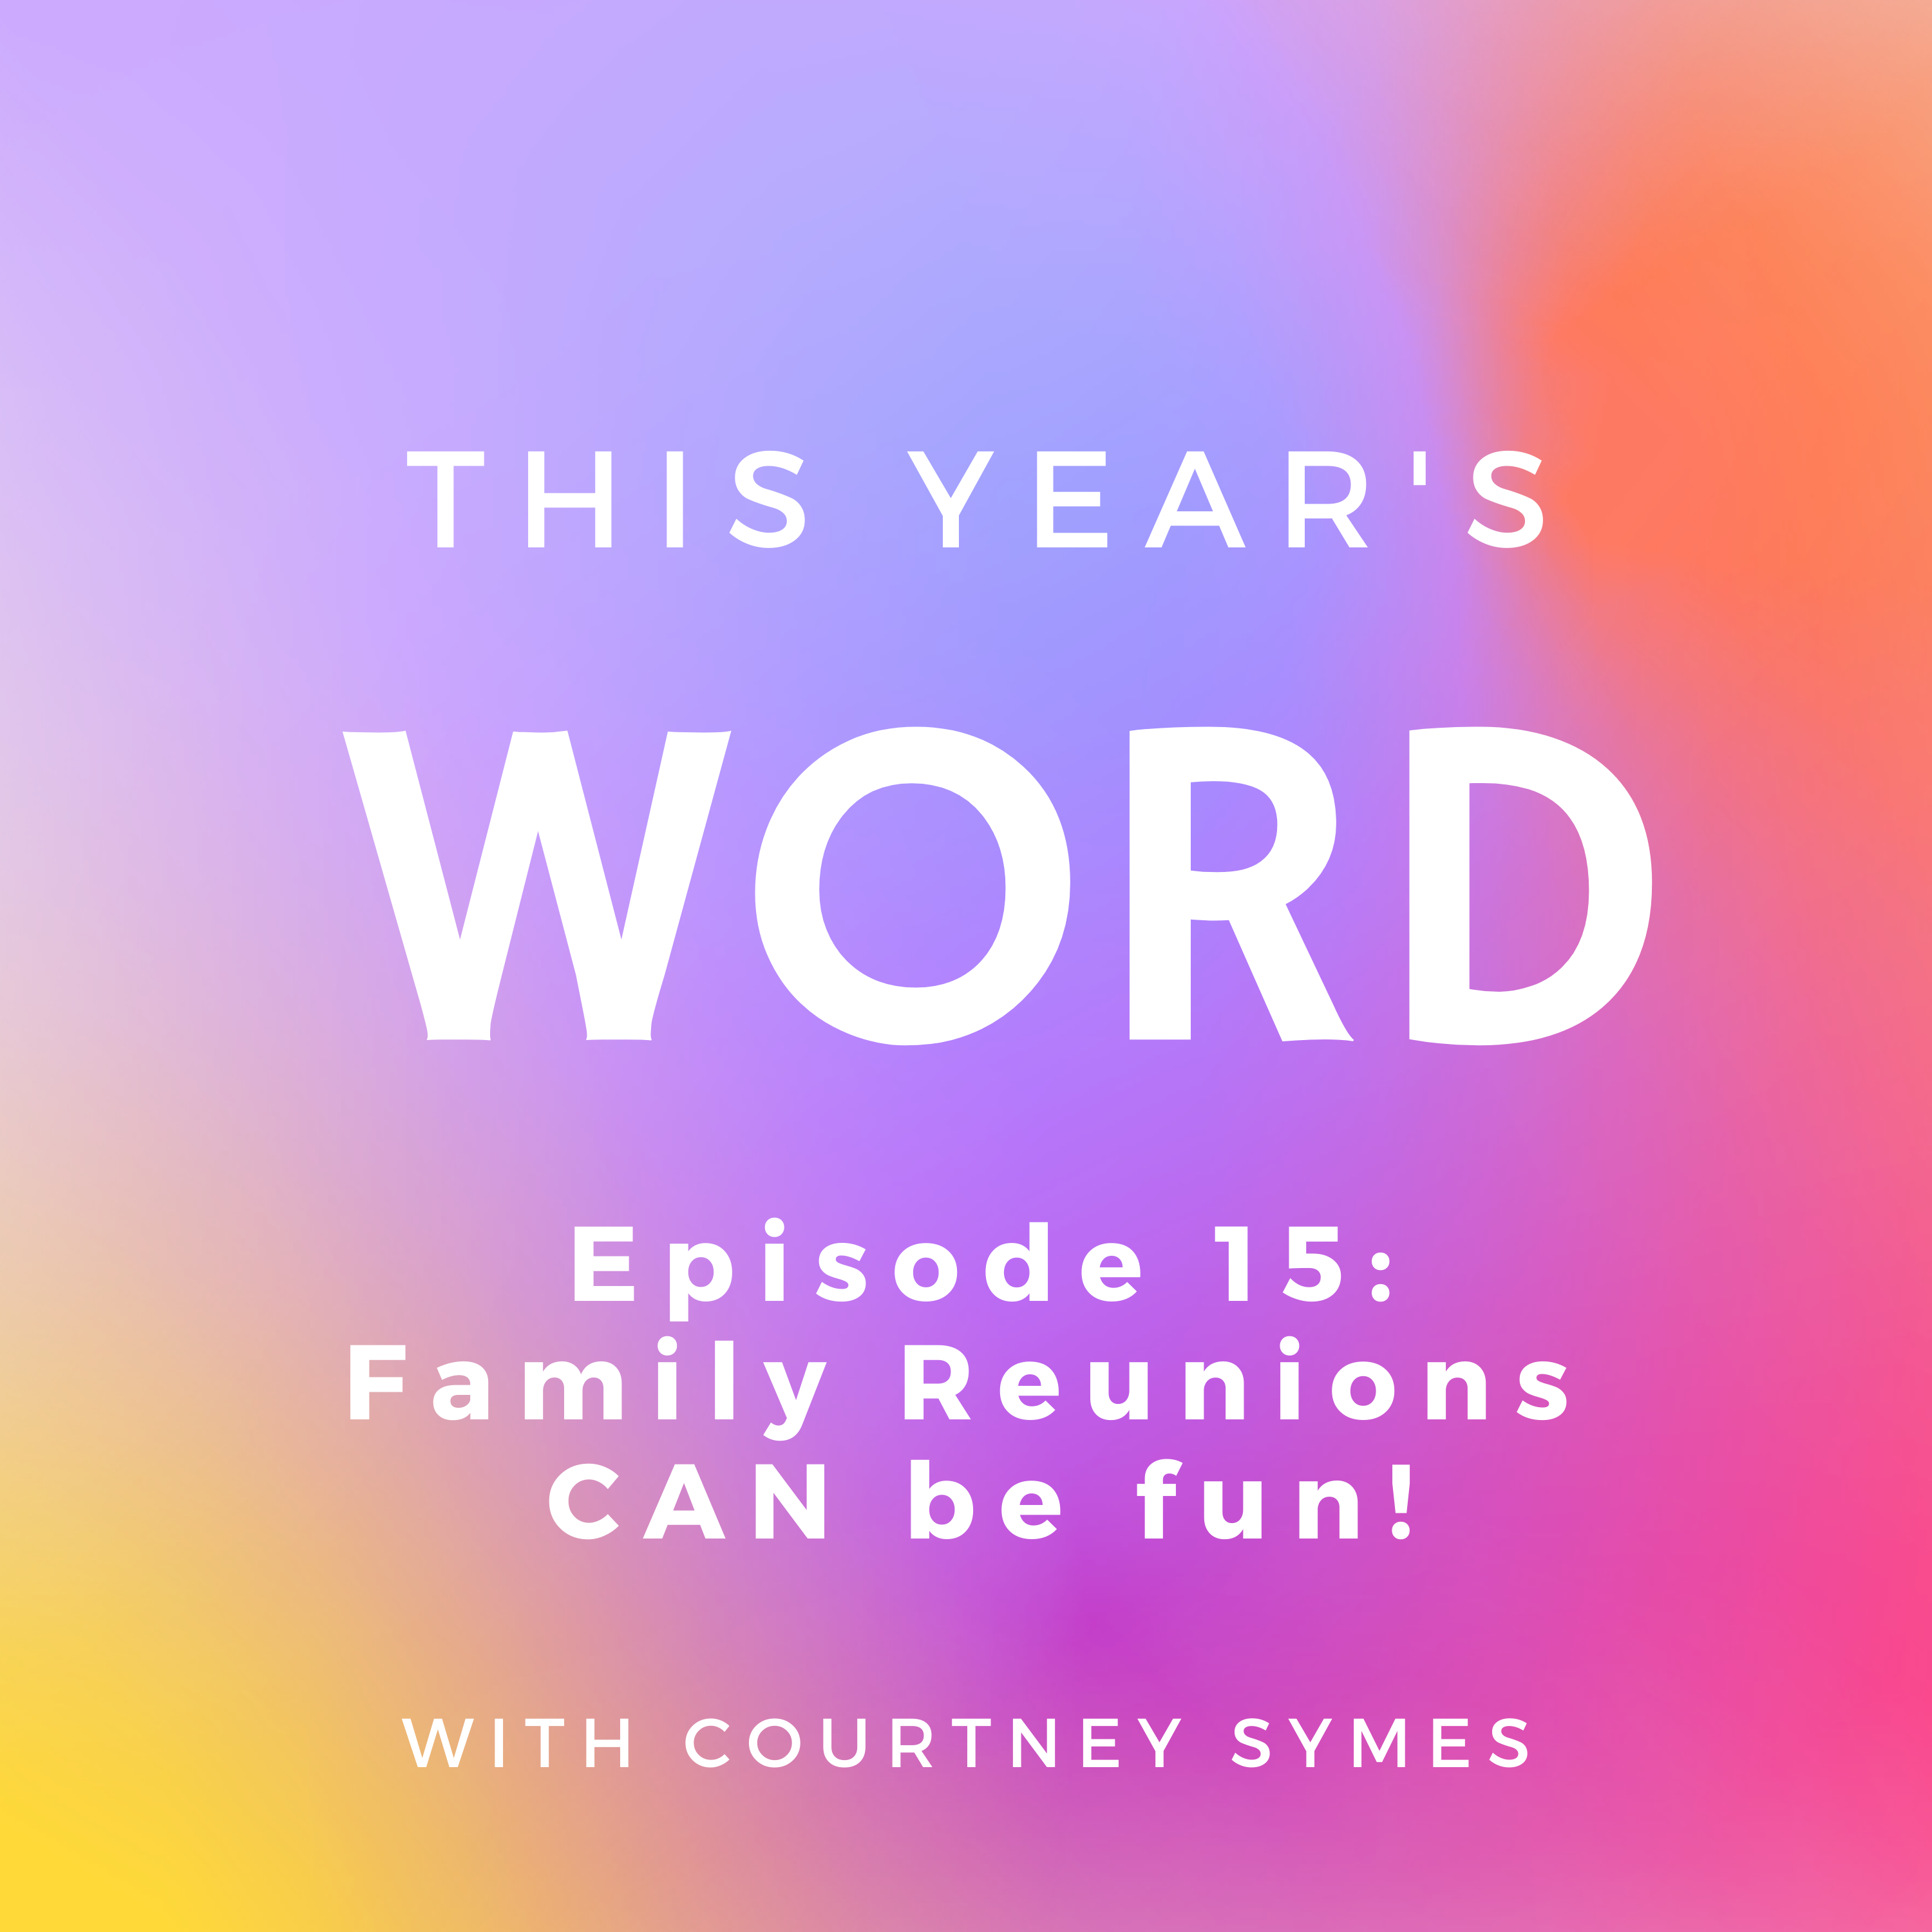 This Year’s Word Podcast Shownotes: Episode 15, Family Reunions CAN be fun!